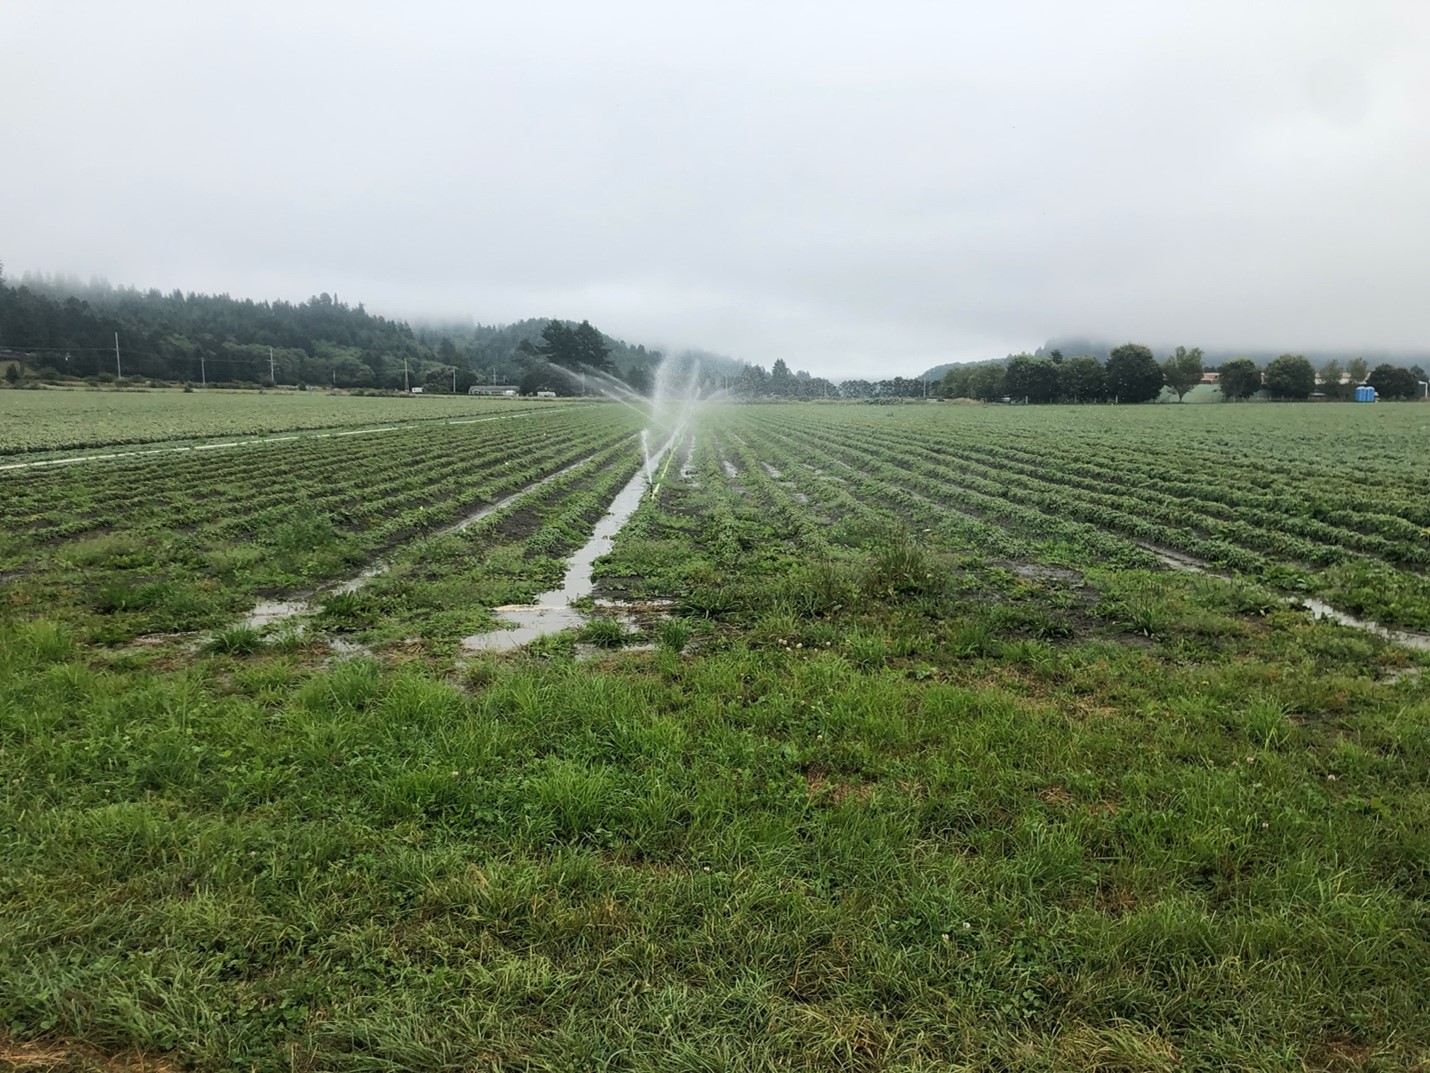 A lily bulb field with active sprinklers down one row. Water is collecting in the furrows, but not draining off the field. There is a grass filter strip in the foreground along the edge of the field.